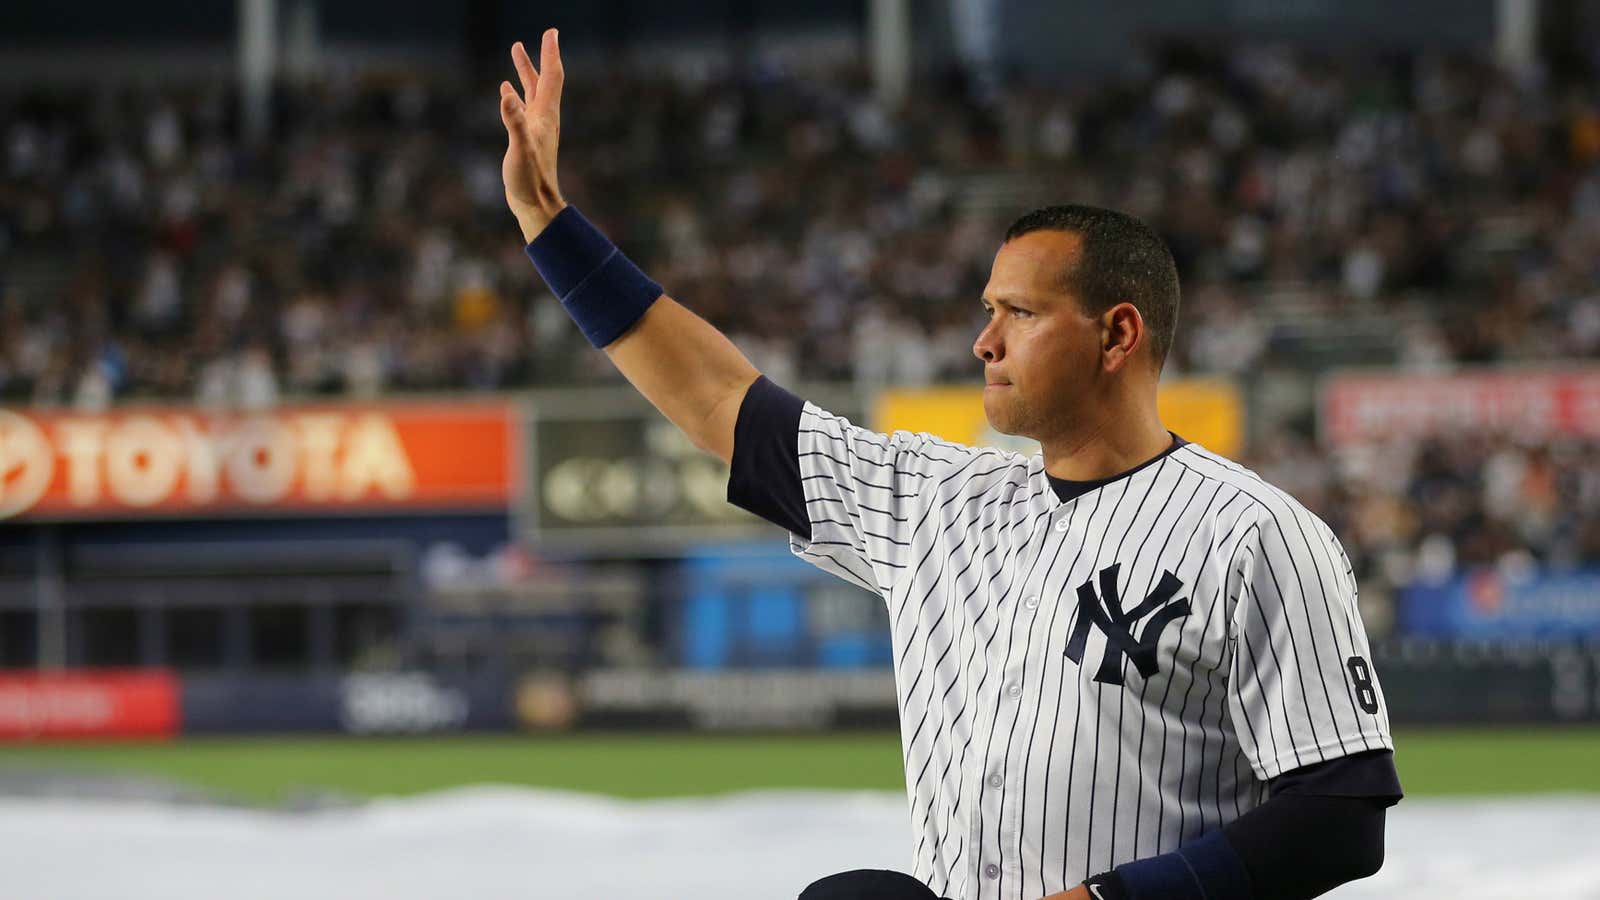 We are all Alex Rodriguez.